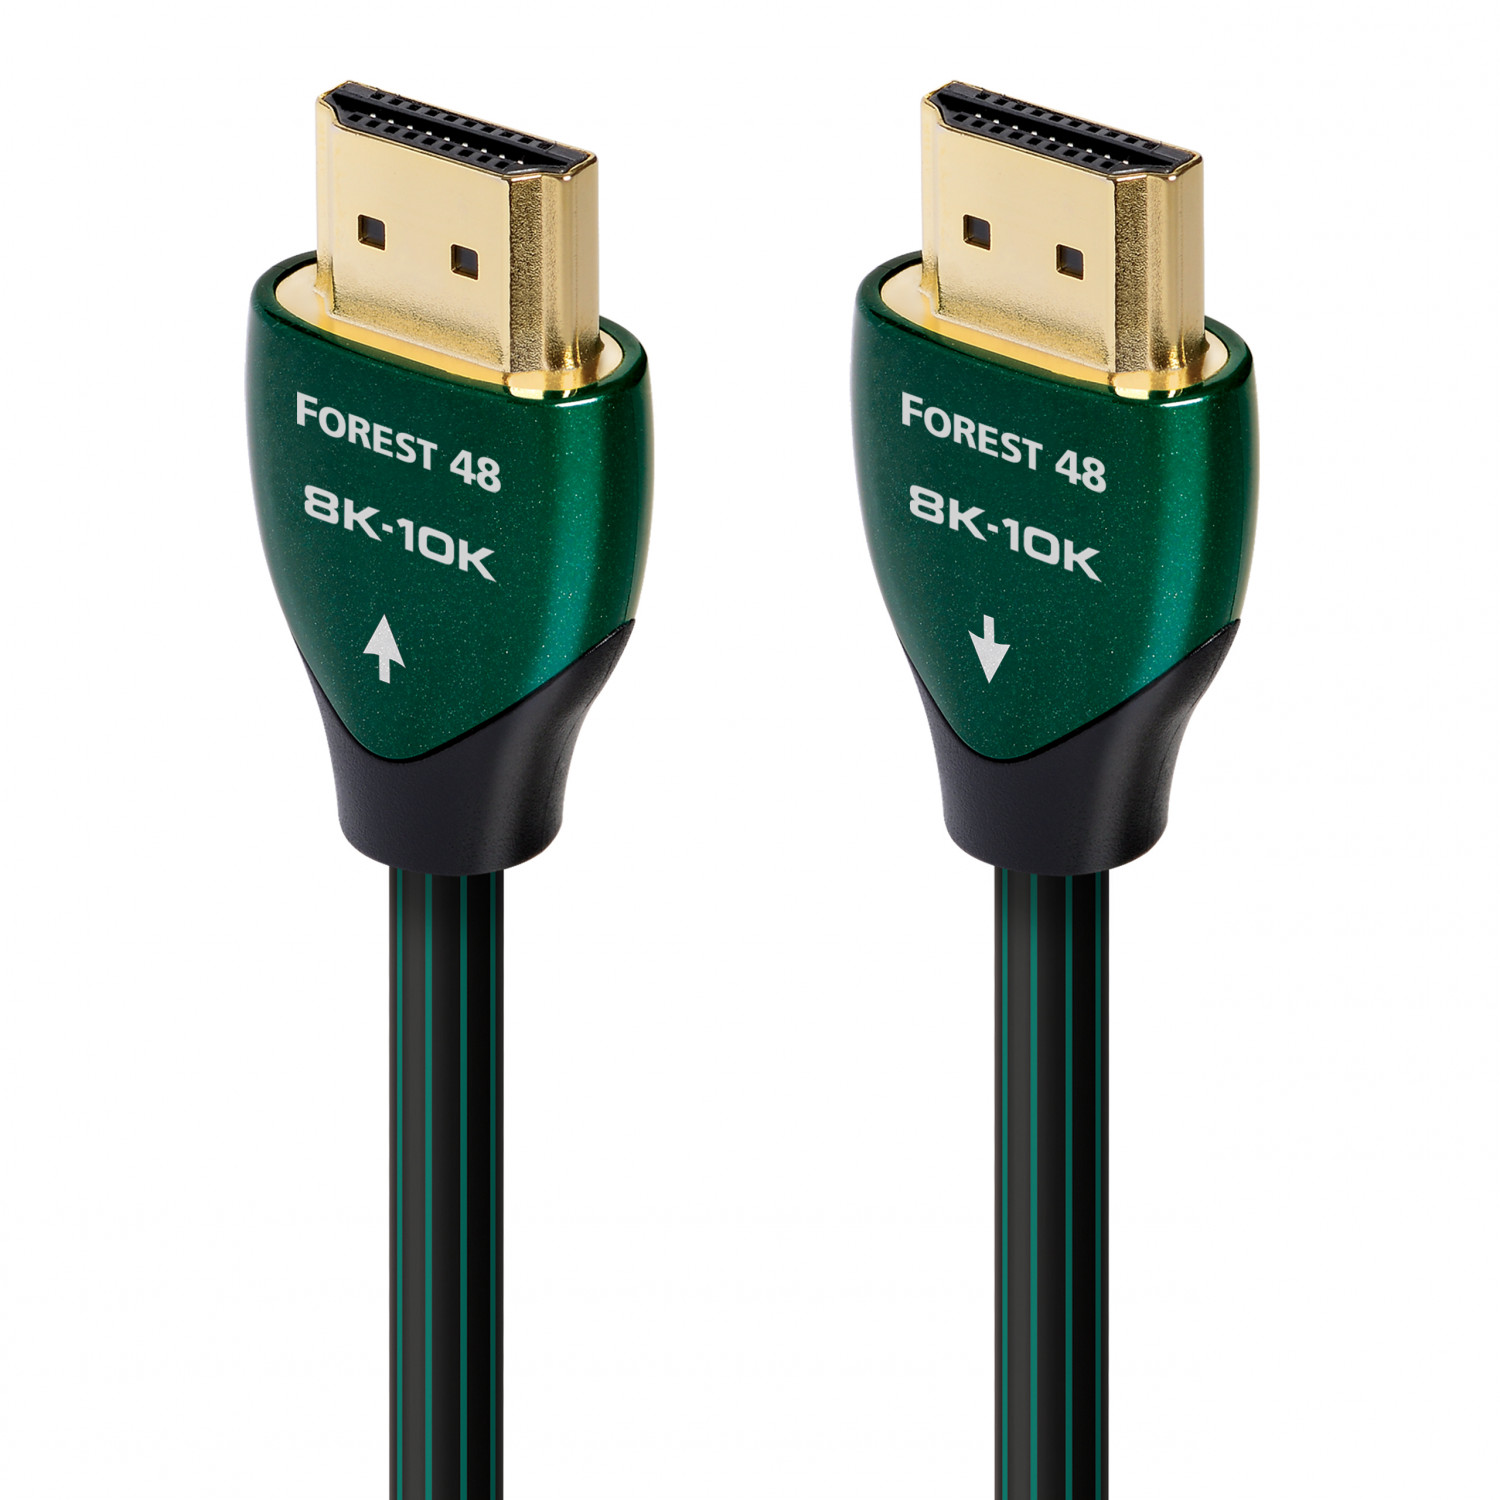 HDMI кабели Audioquest HDMI Forest 48G PVC 0.6m hdmi кабели audioquest hdmi cherry cola 30 0 м